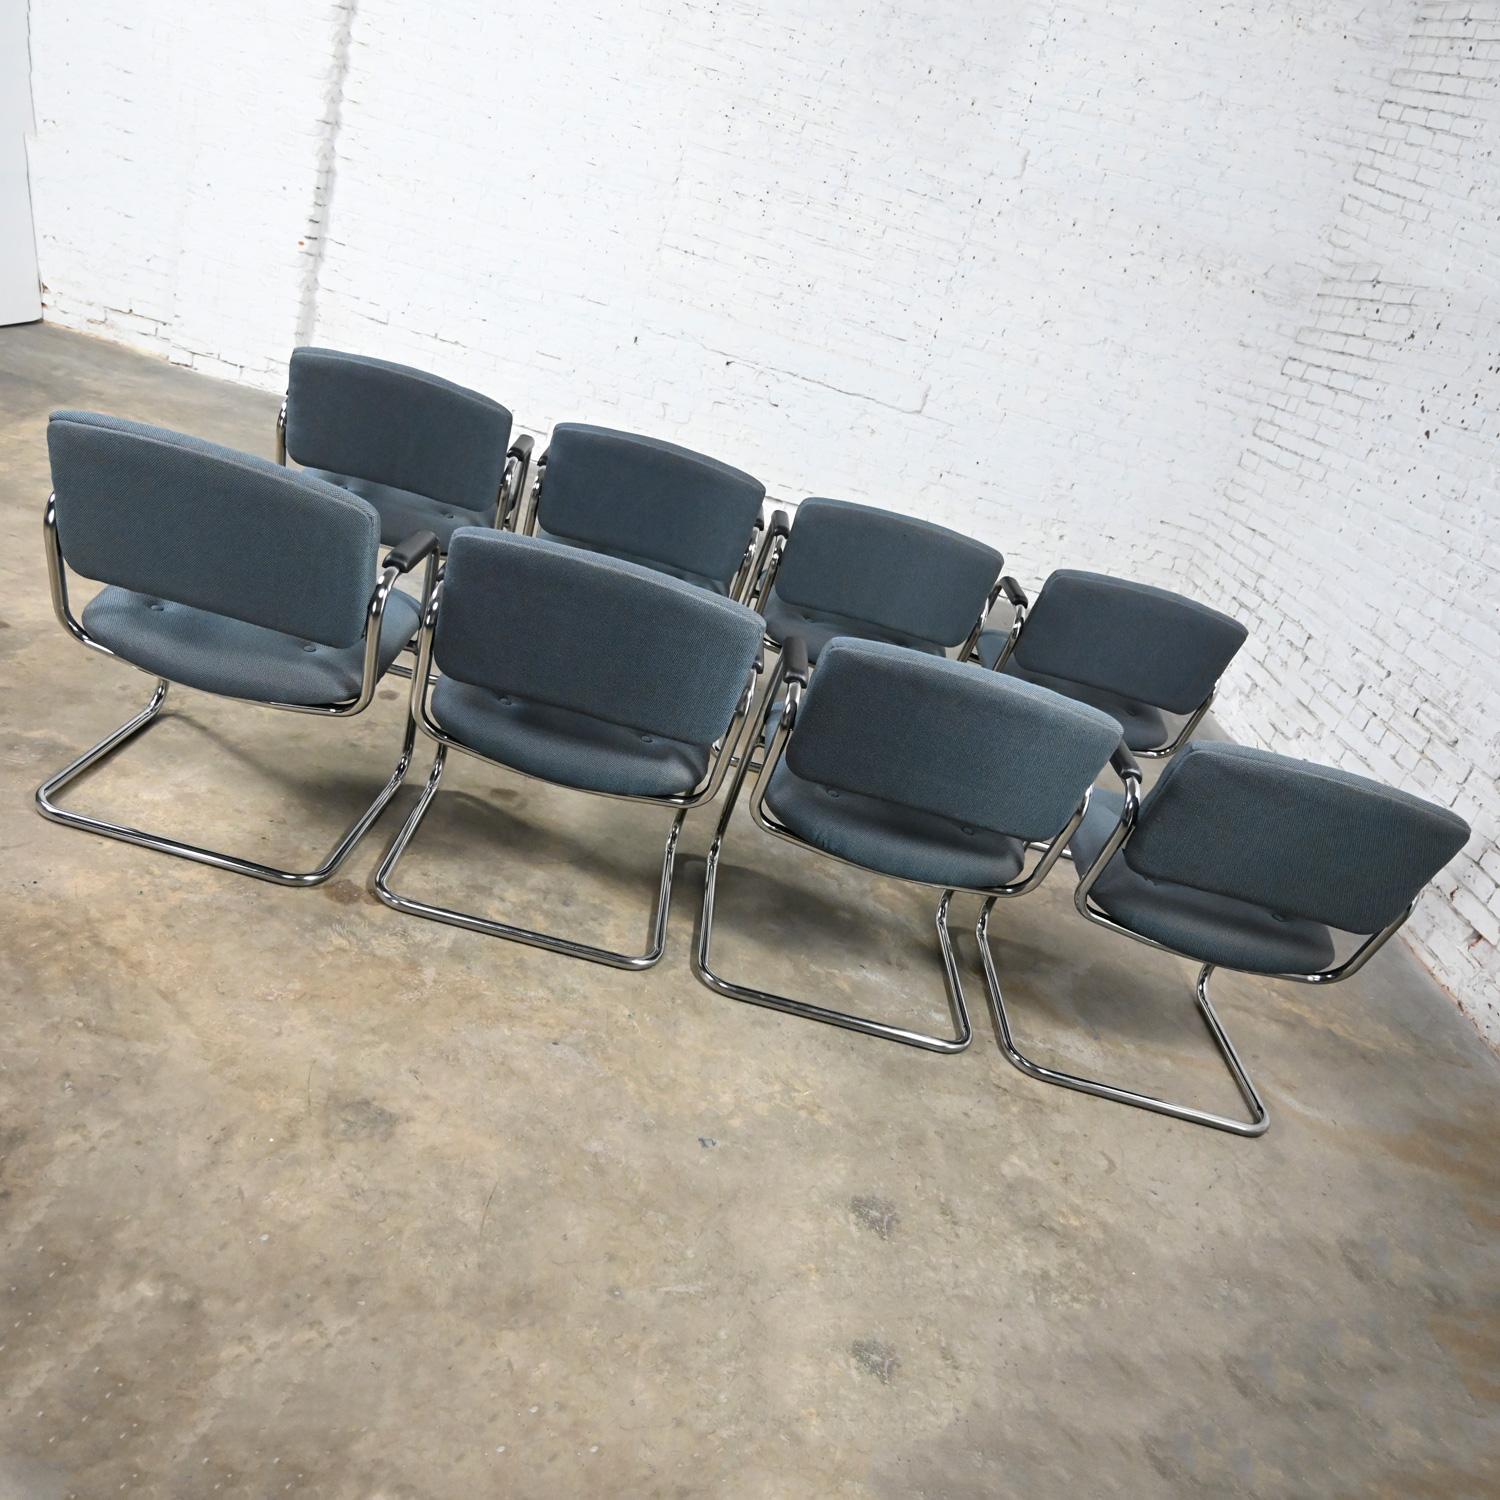 Late 20th Century Gray & Chrome Cantilever Chairs Style Steelcase Set of 8 For Sale 2